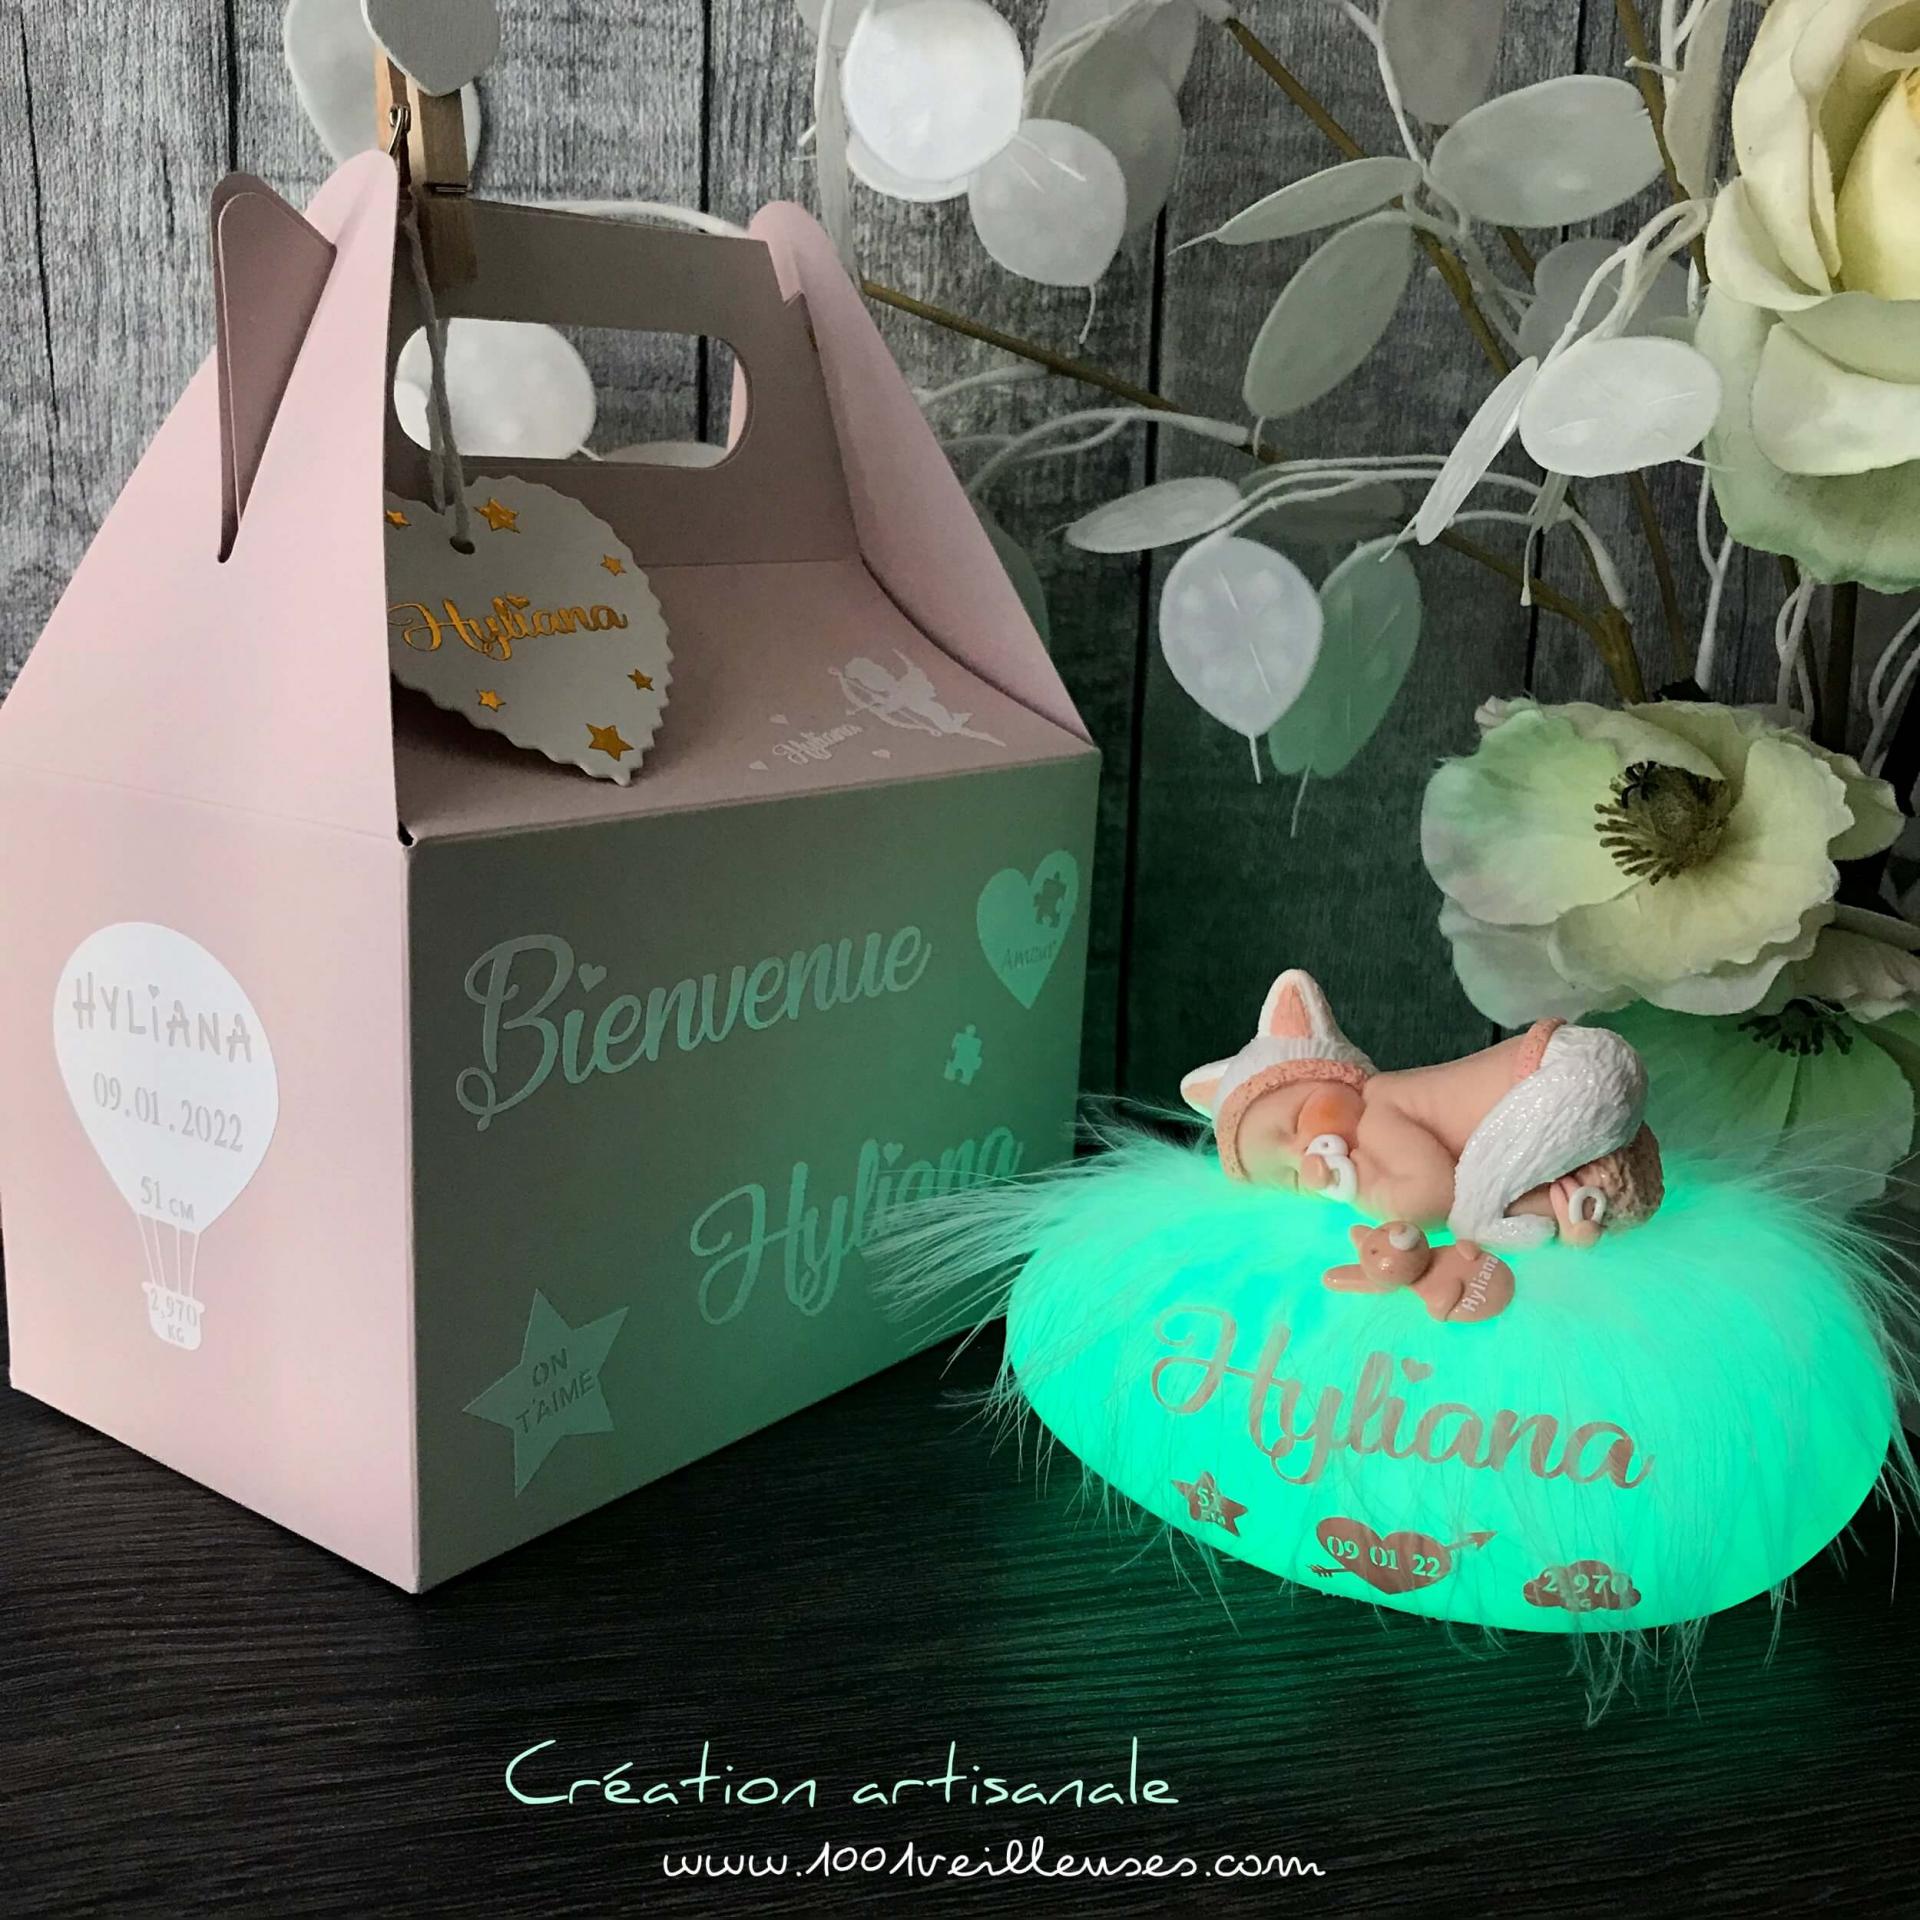 Handmade baby kitten night light with a fimo baby disguised as a cat, with its customizable gift box featuring the child's name, angled view